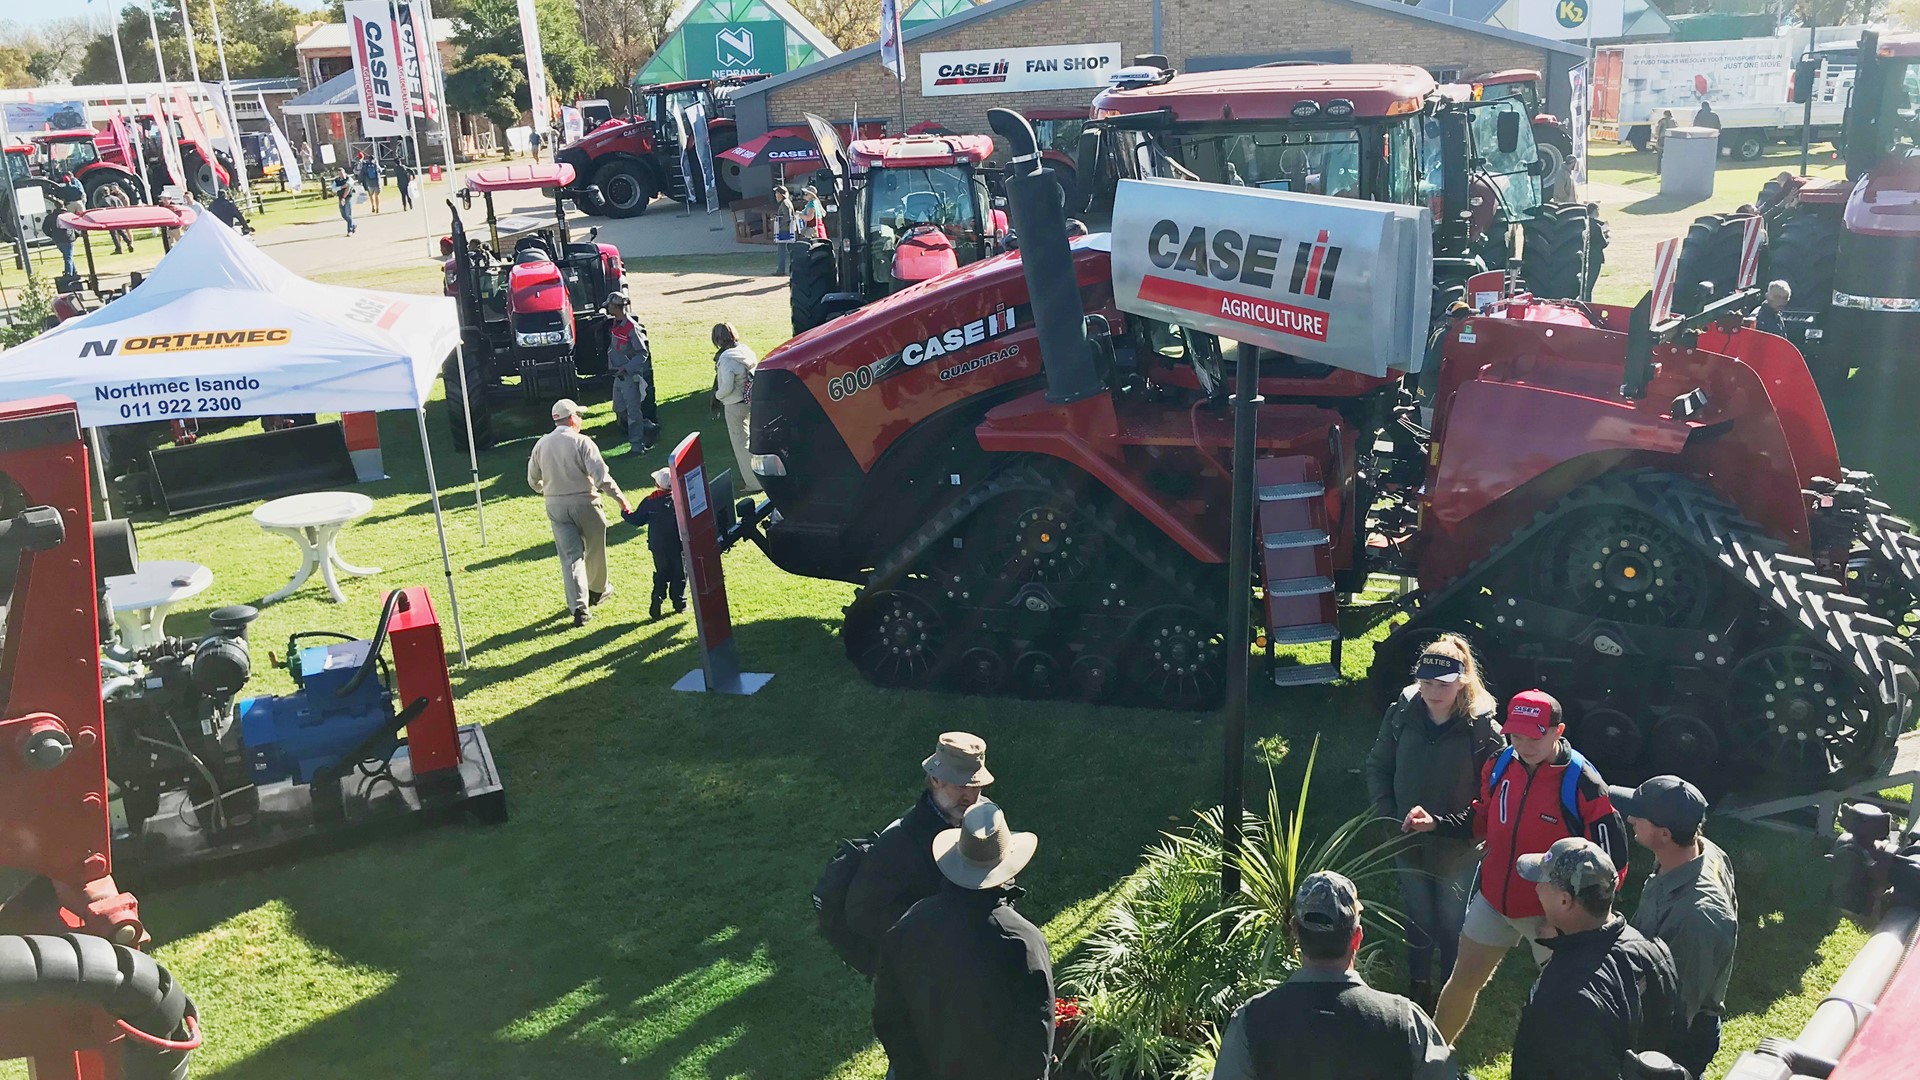 The Case IH set up at NAMPO 2018